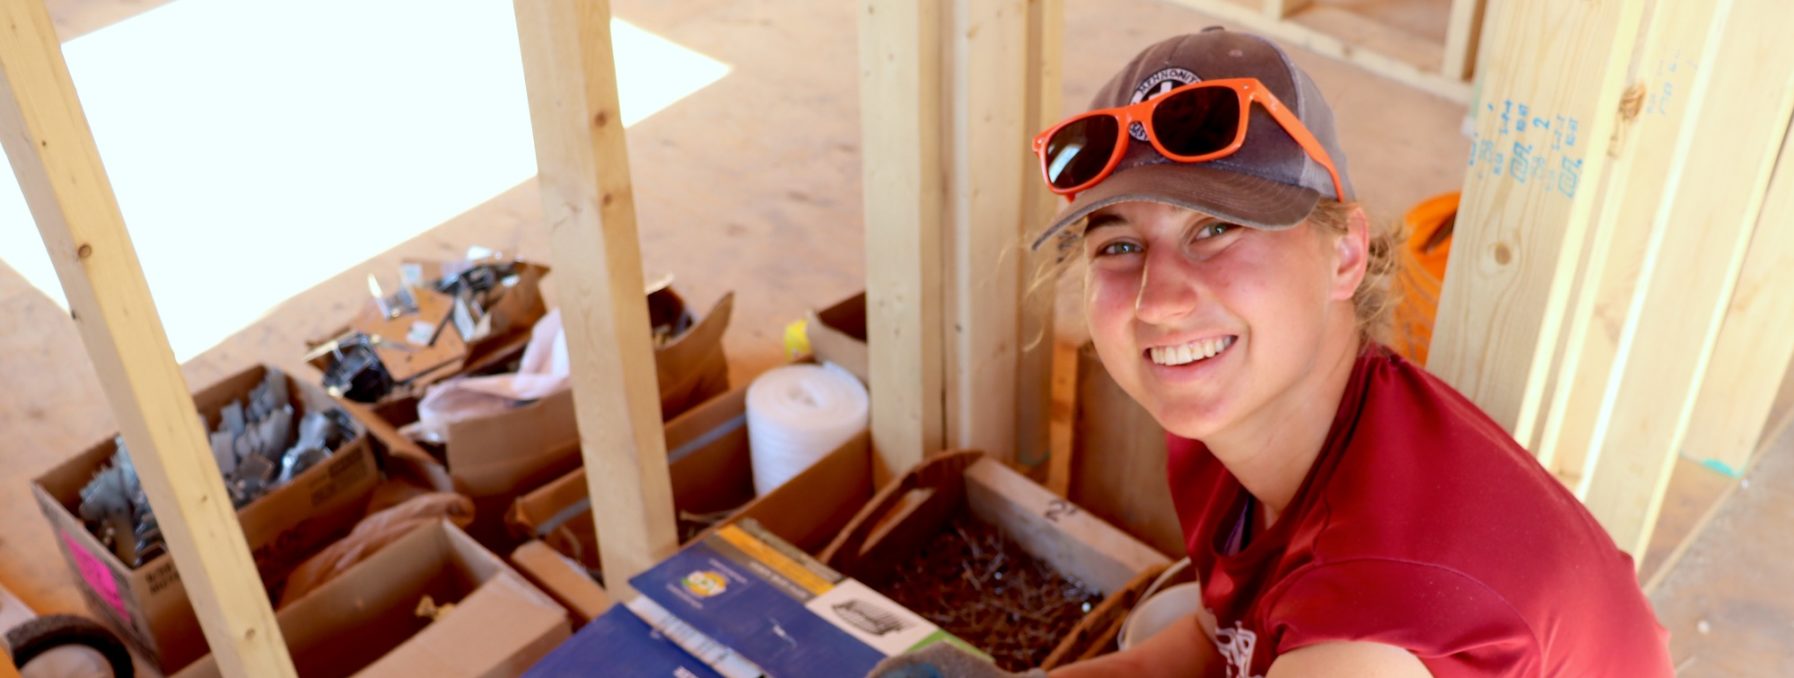 Sofia Epp, an MDS volunteer, sifts through tools at a new build and glances up at the camera for a picture